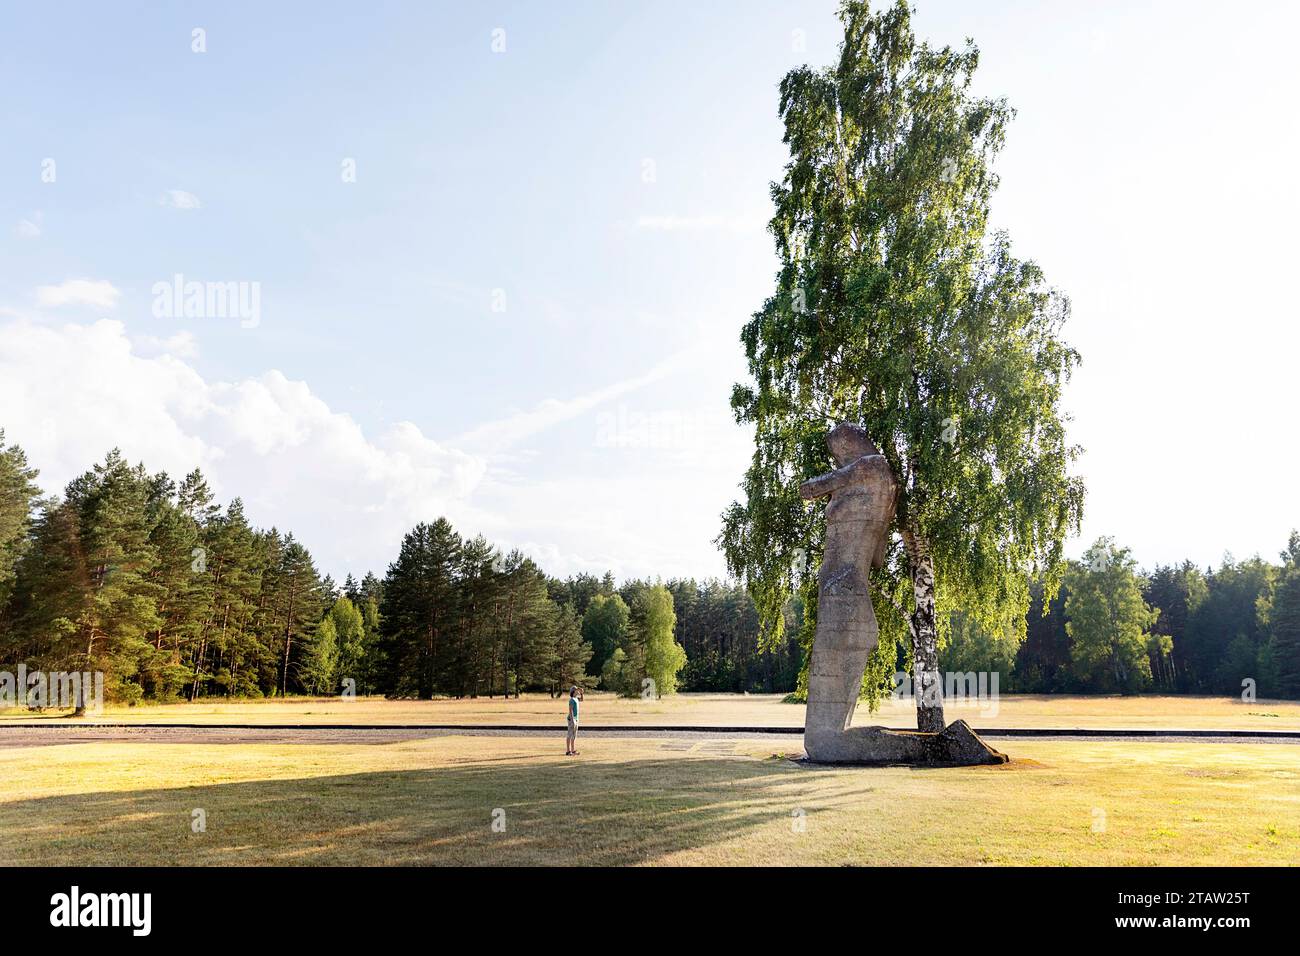 Tourist looking at the giant woman sculpture at Salaspils Memorial, one of Europe's largest monument complexes commemorating victims of Nazism, Latvia Stock Photo